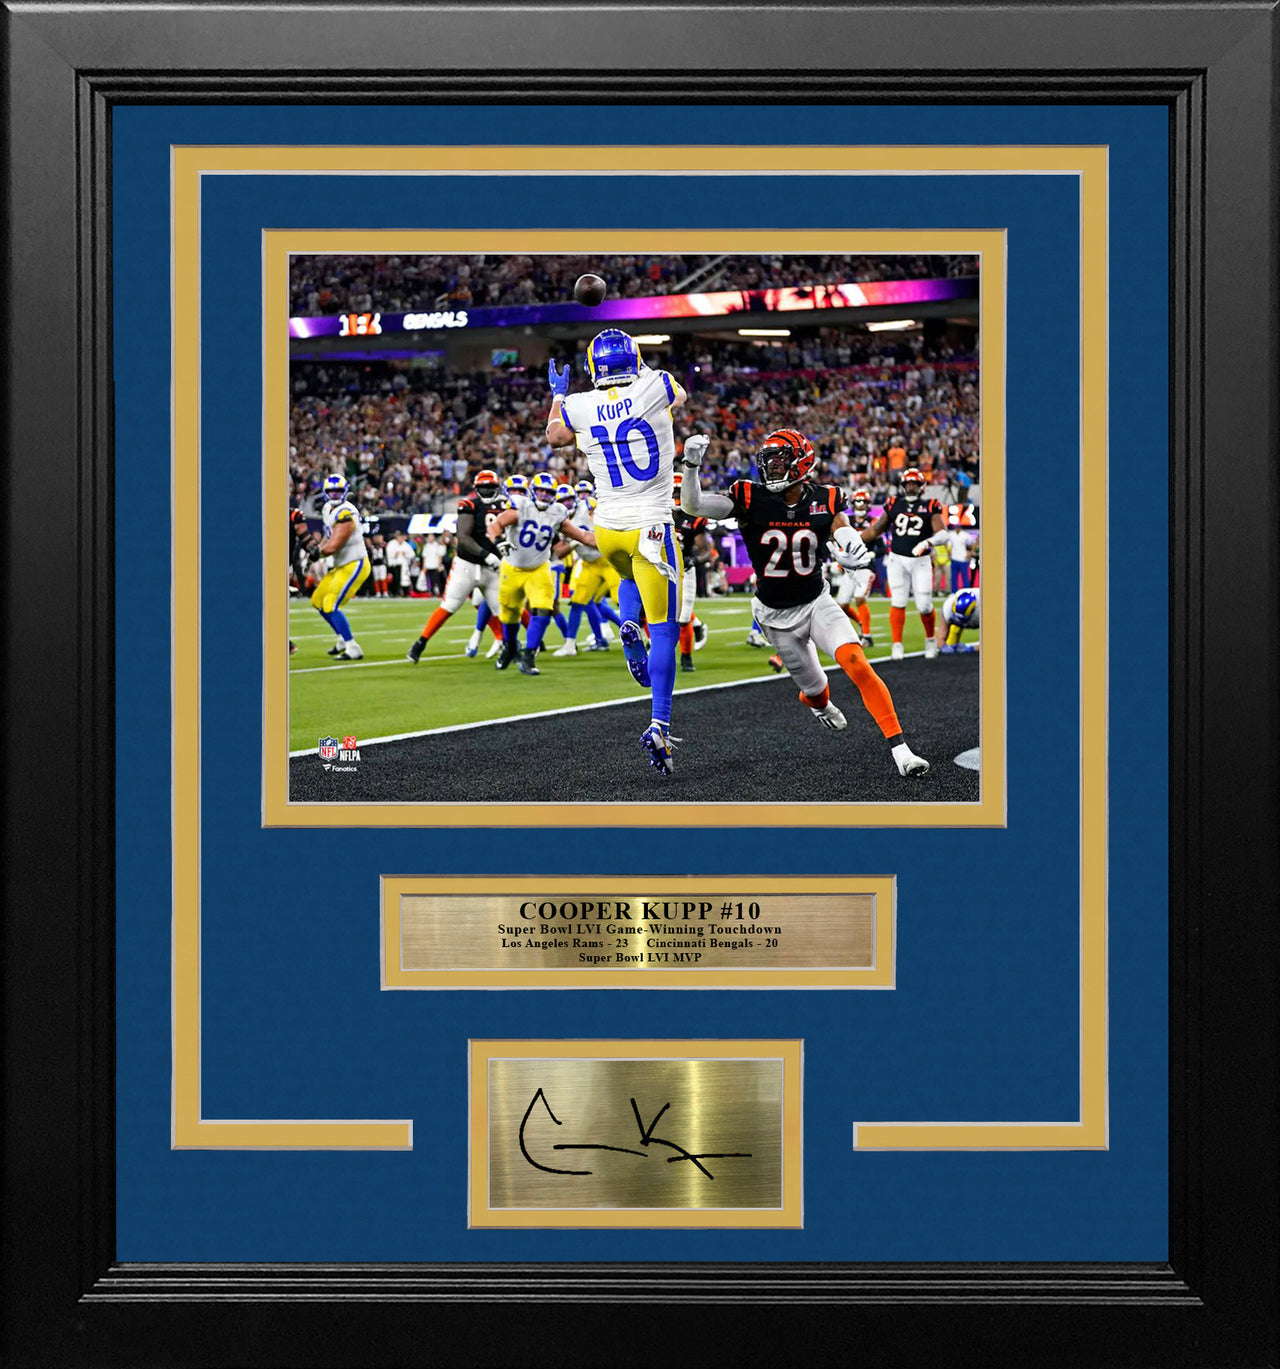 Cooper Kupp Super Bowl LVI Game-Winning Touchdown LA Rams 8" x 10" Framed Photo with Engraved Autograph - Dynasty Sports & Framing 